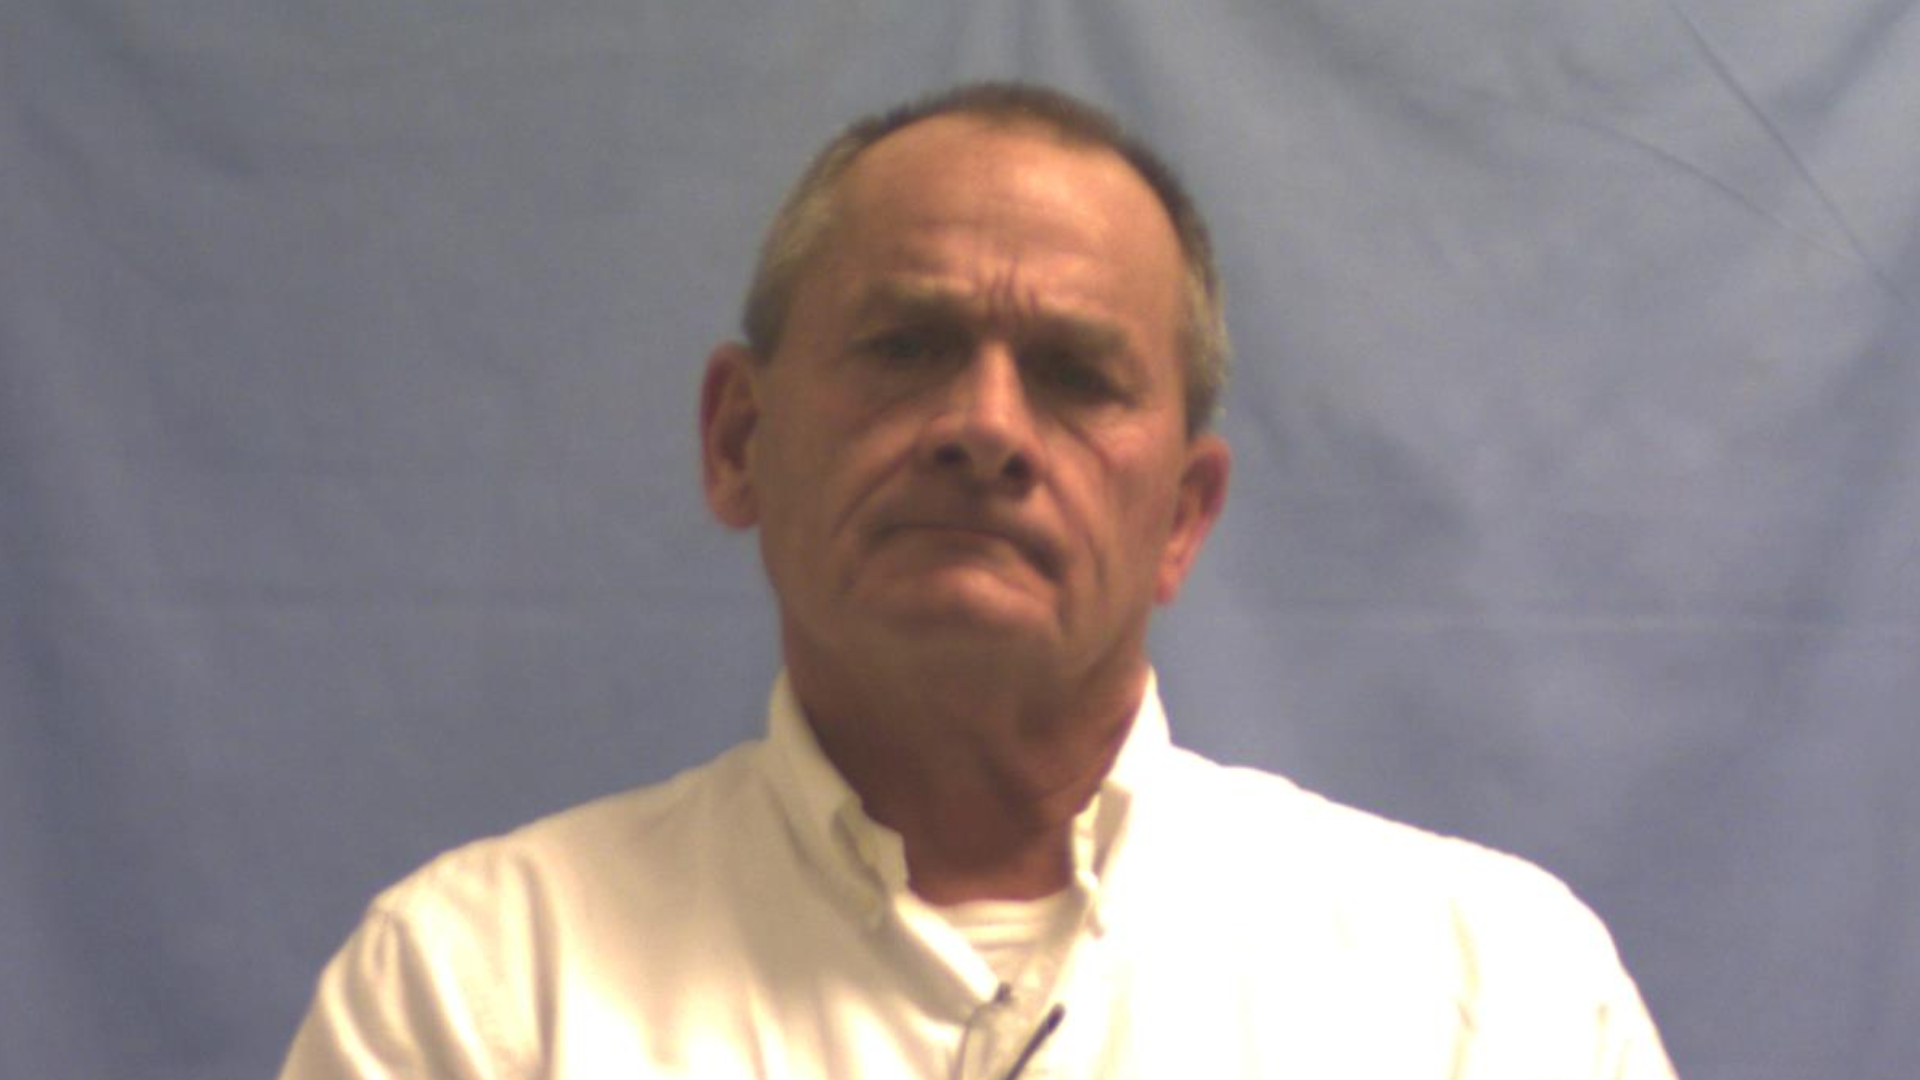 Sheriff Jimmy Stephens was arrested after deputies found drugs in his patrol vehicle in Crawford County.